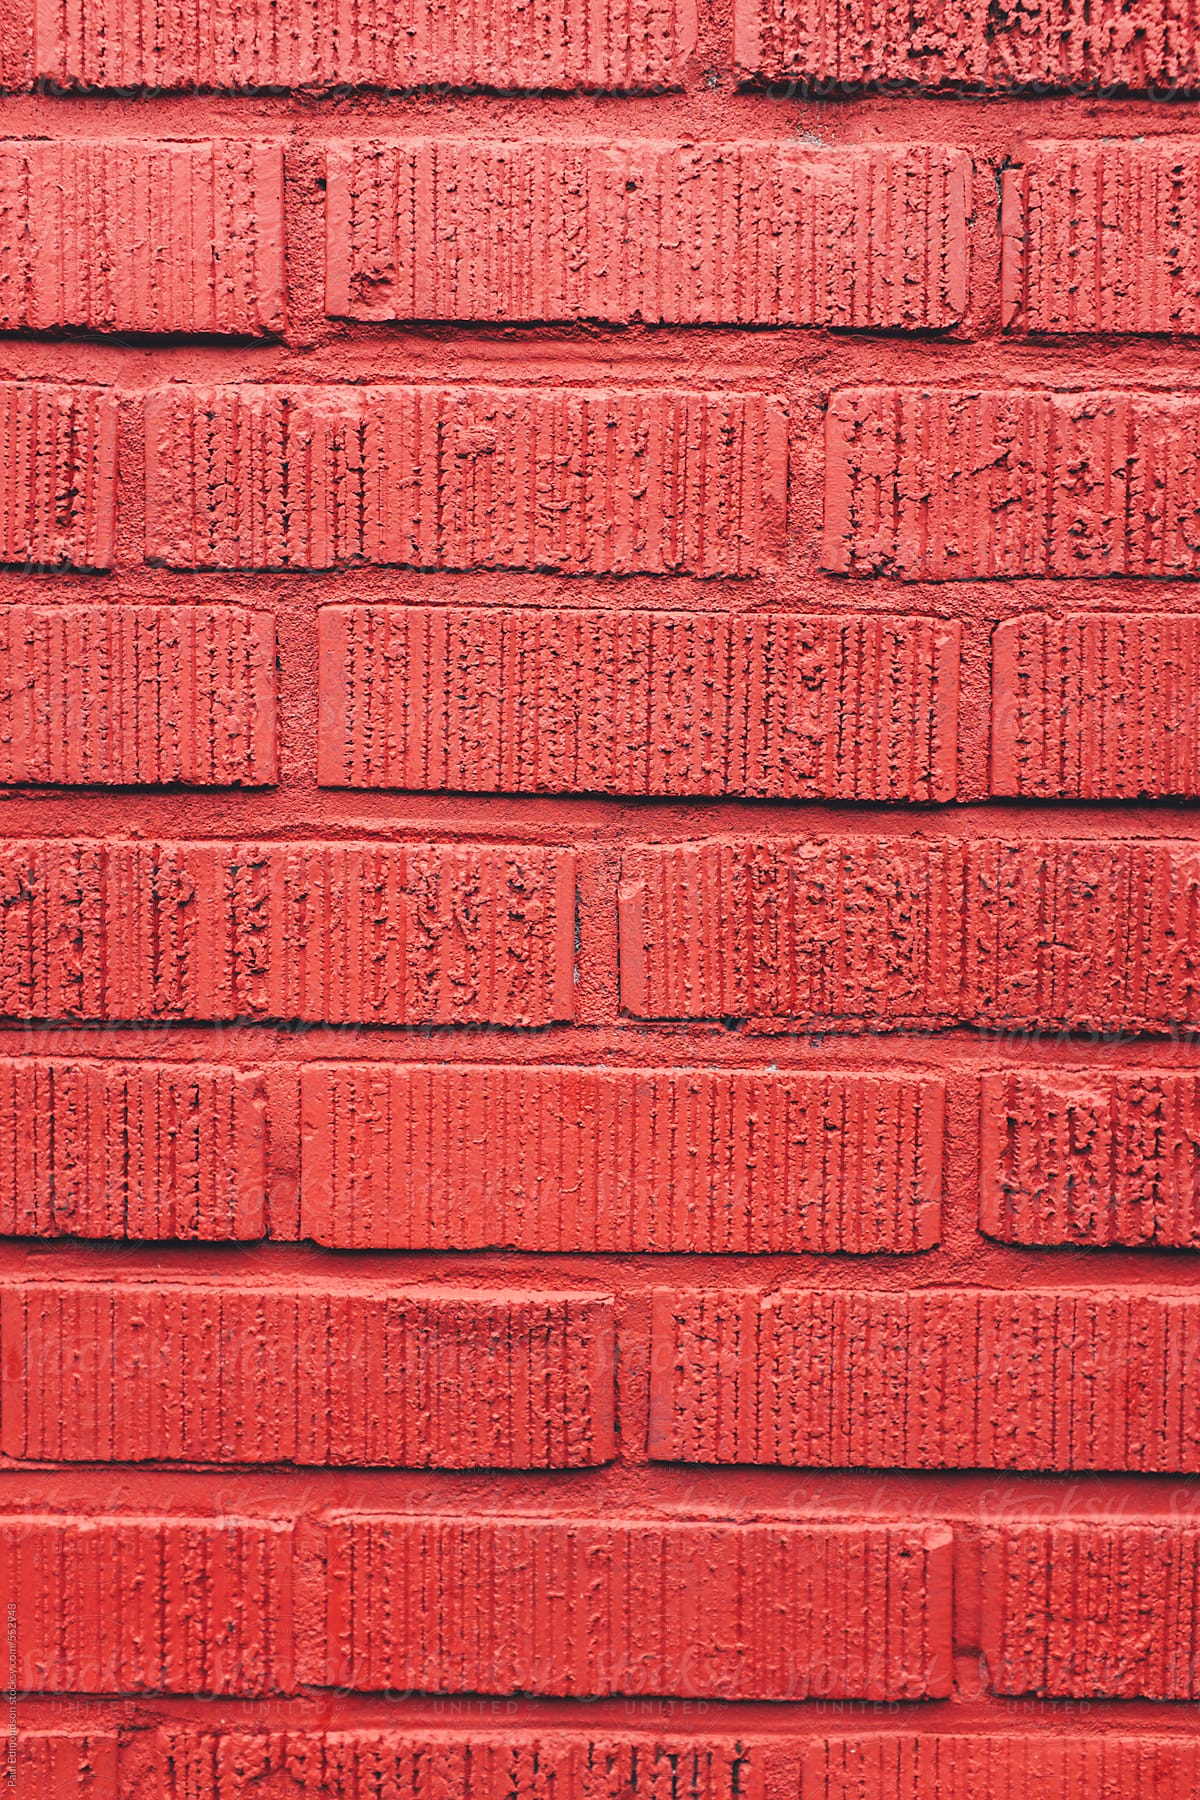 Bright red paint covering brick wall